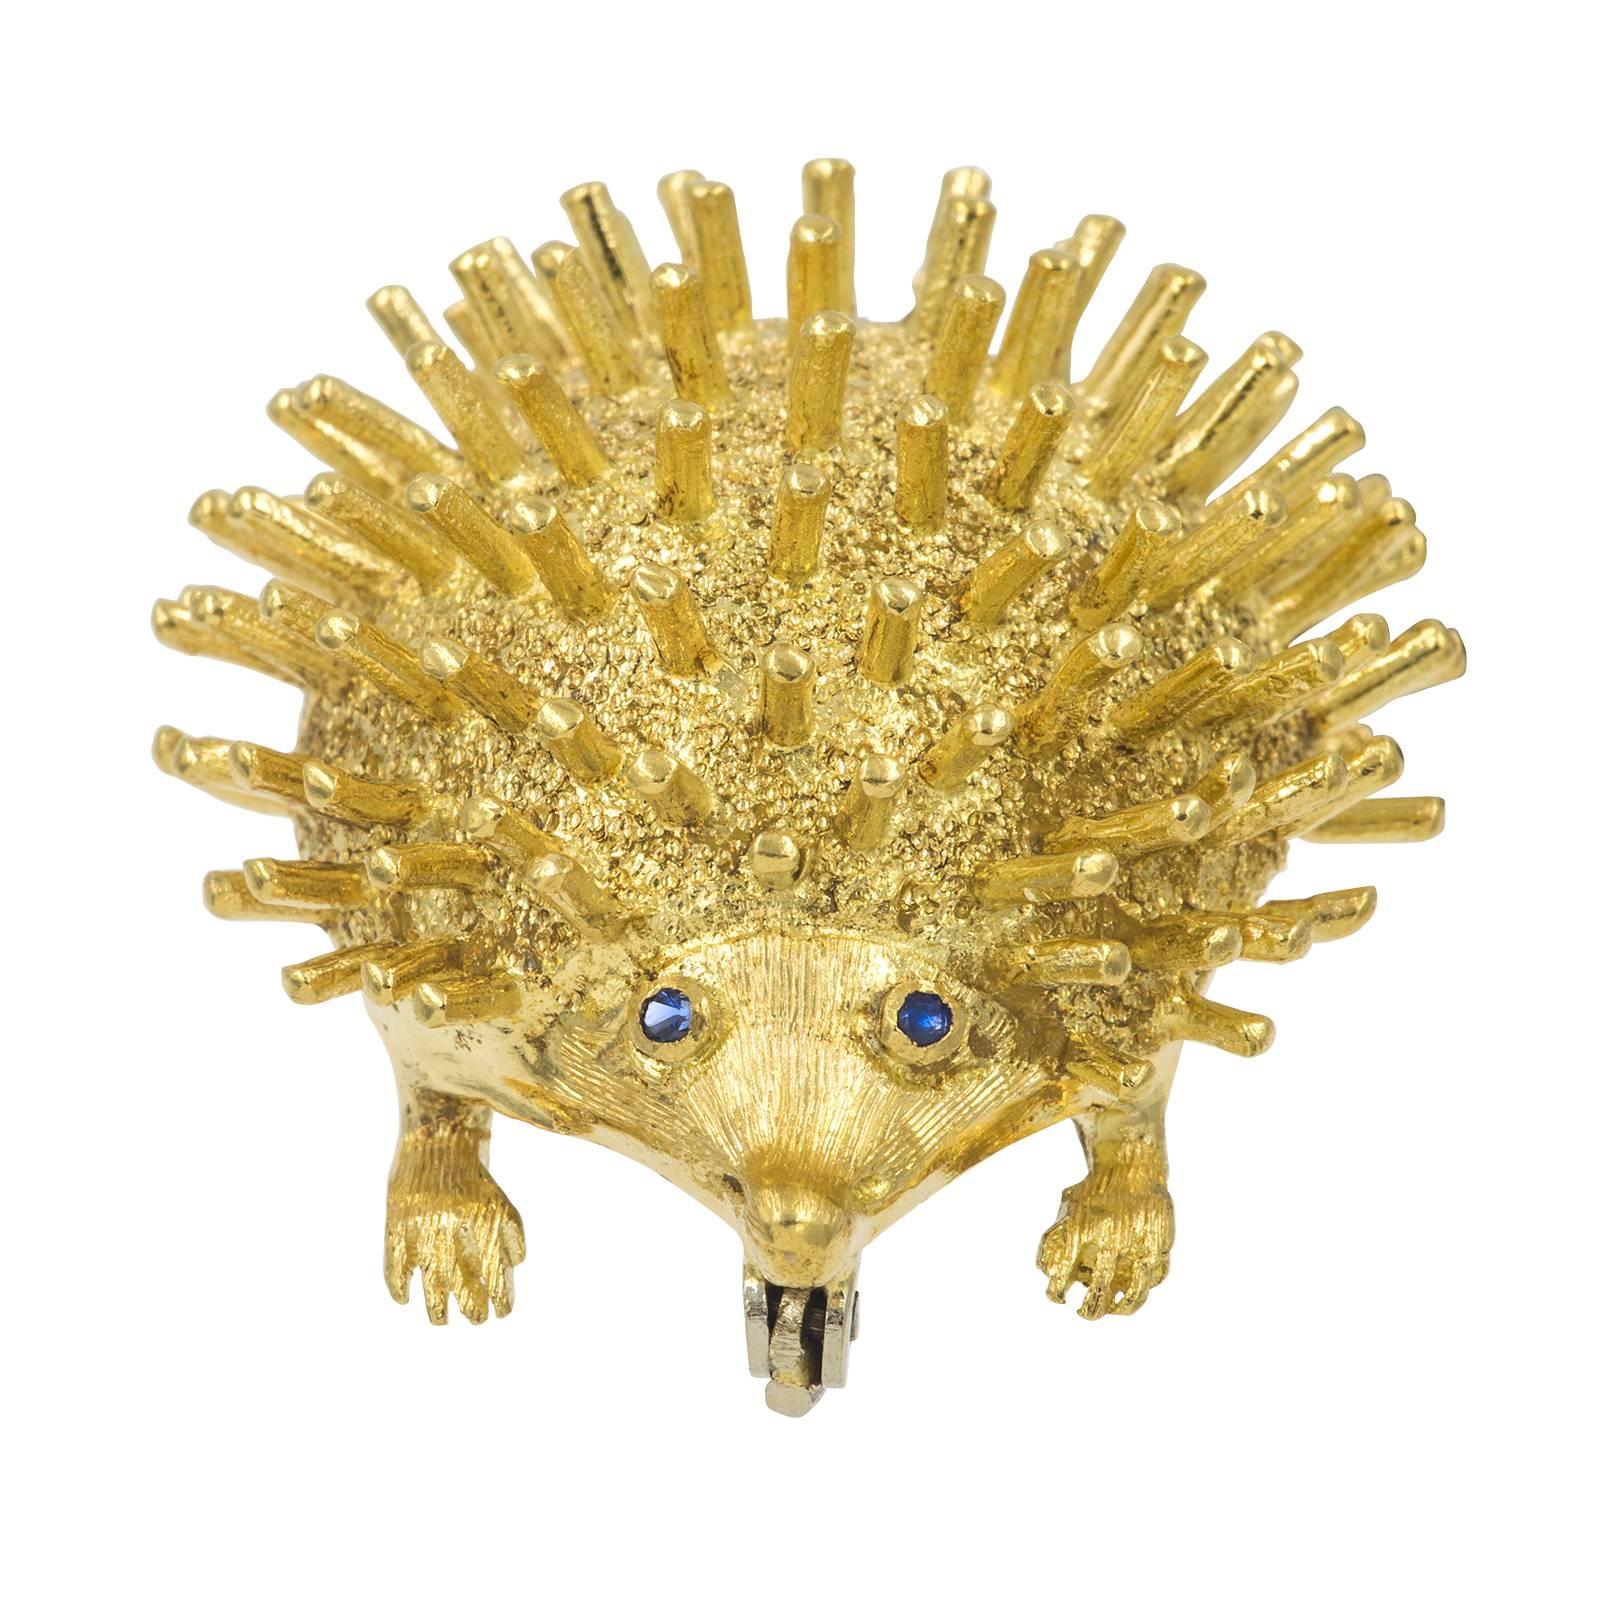 Charming spiny Hedgehog in 18k yellow gold  brooch with blue sapphire eyes.  Nicely detailed little feet.  18.2 grams total weight.  In excellent condition.
